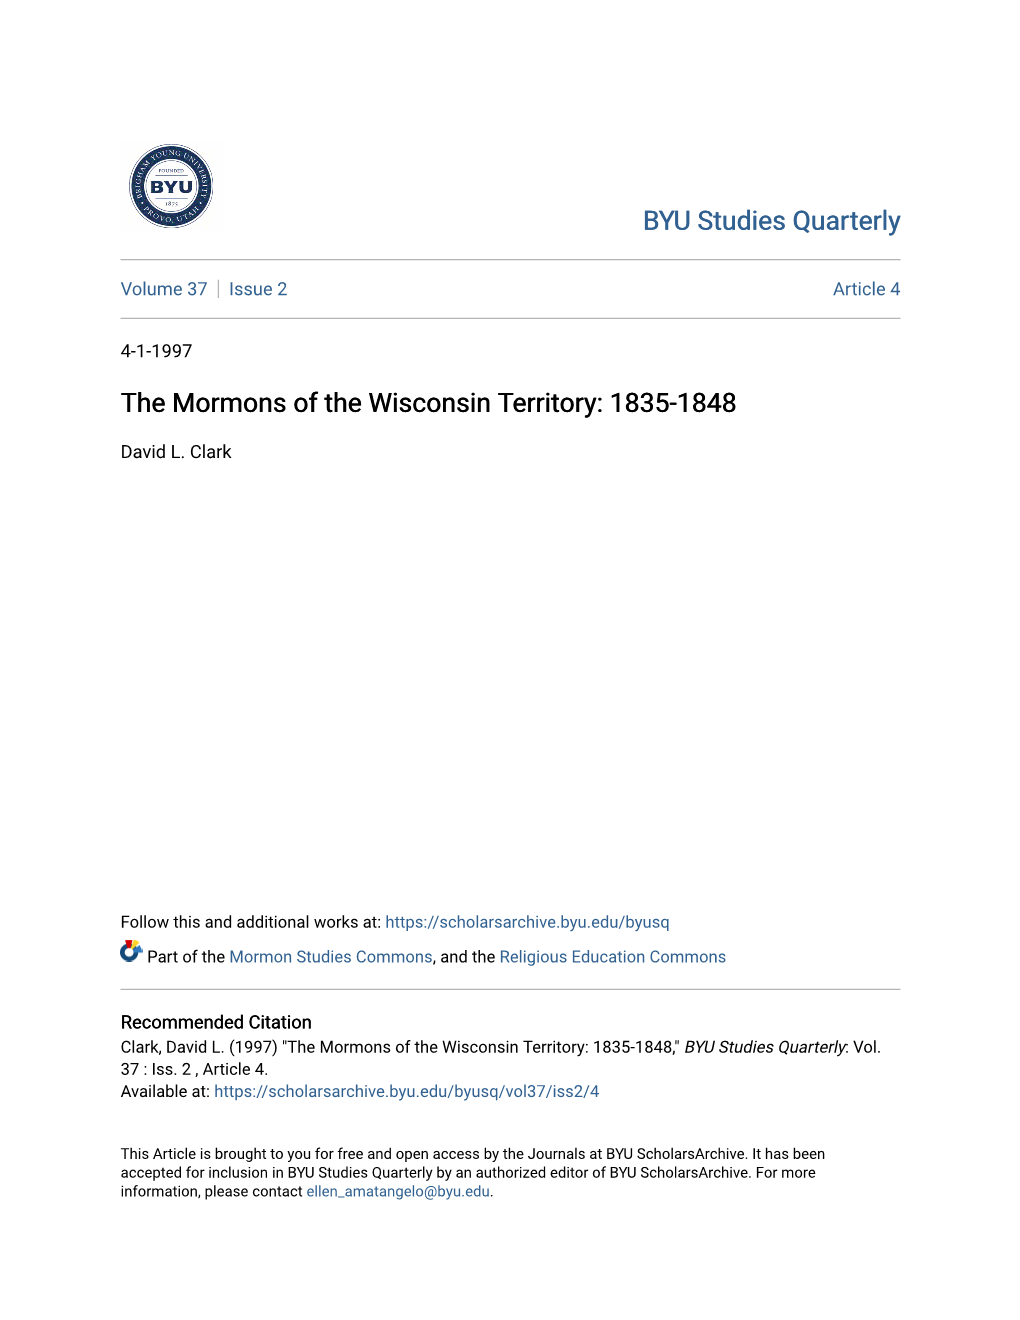 The Mormons of the Wisconsin Territory: 1835-1848